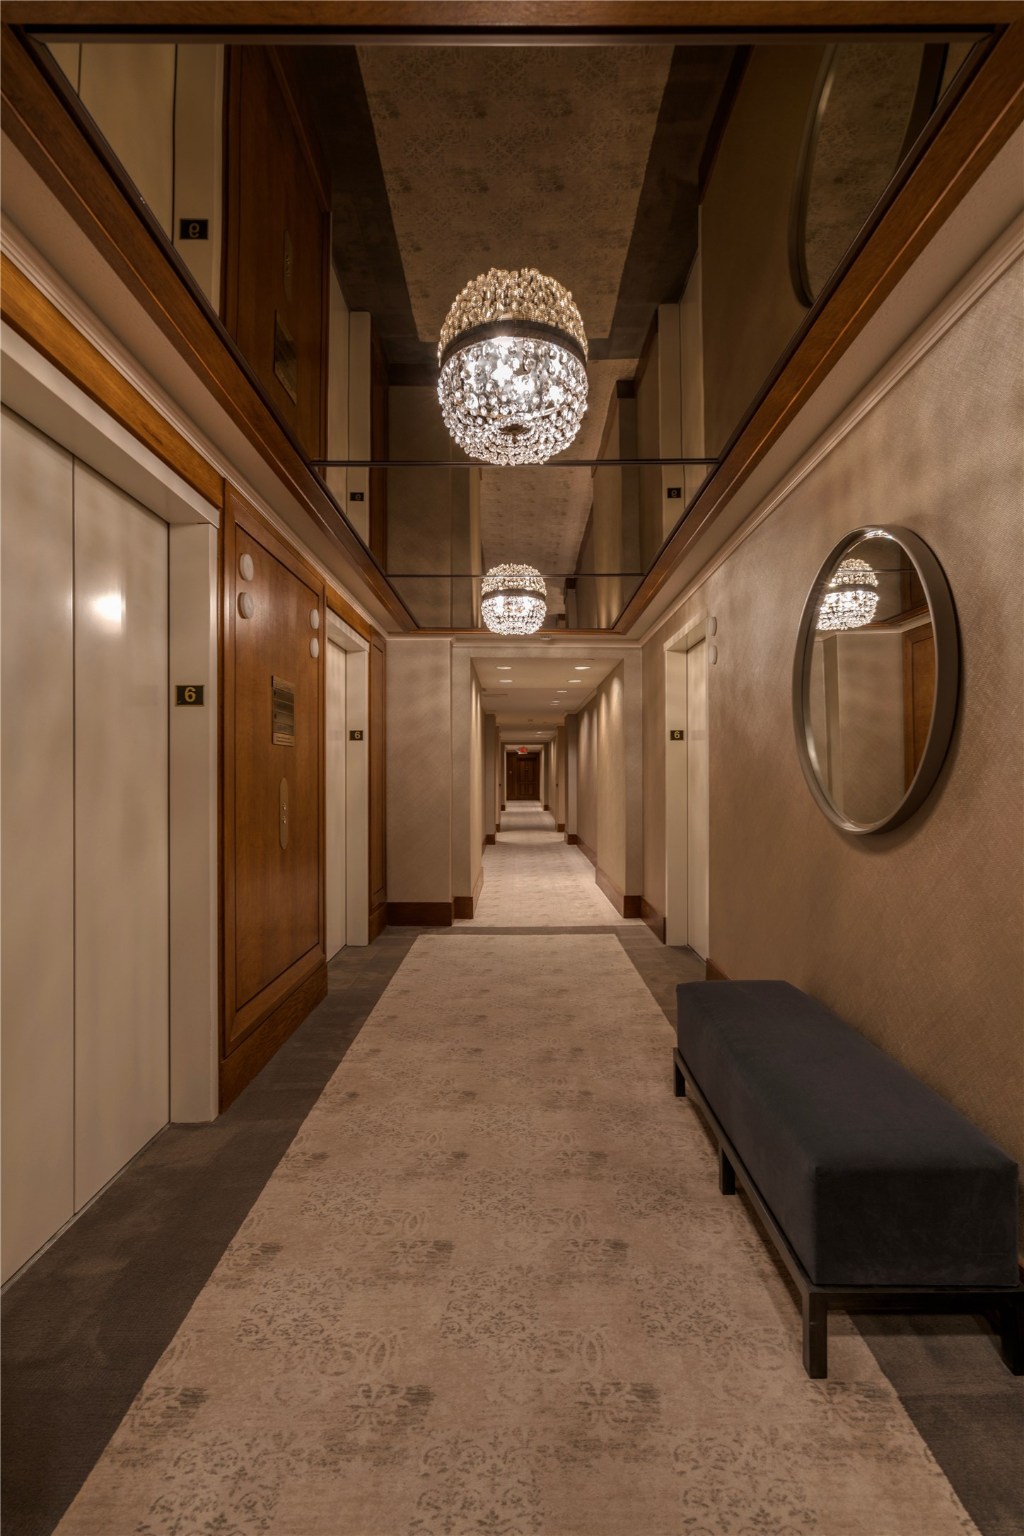 Recently renovated private corridors continue the elegant atmosphere that is associated with Bayou Bend.